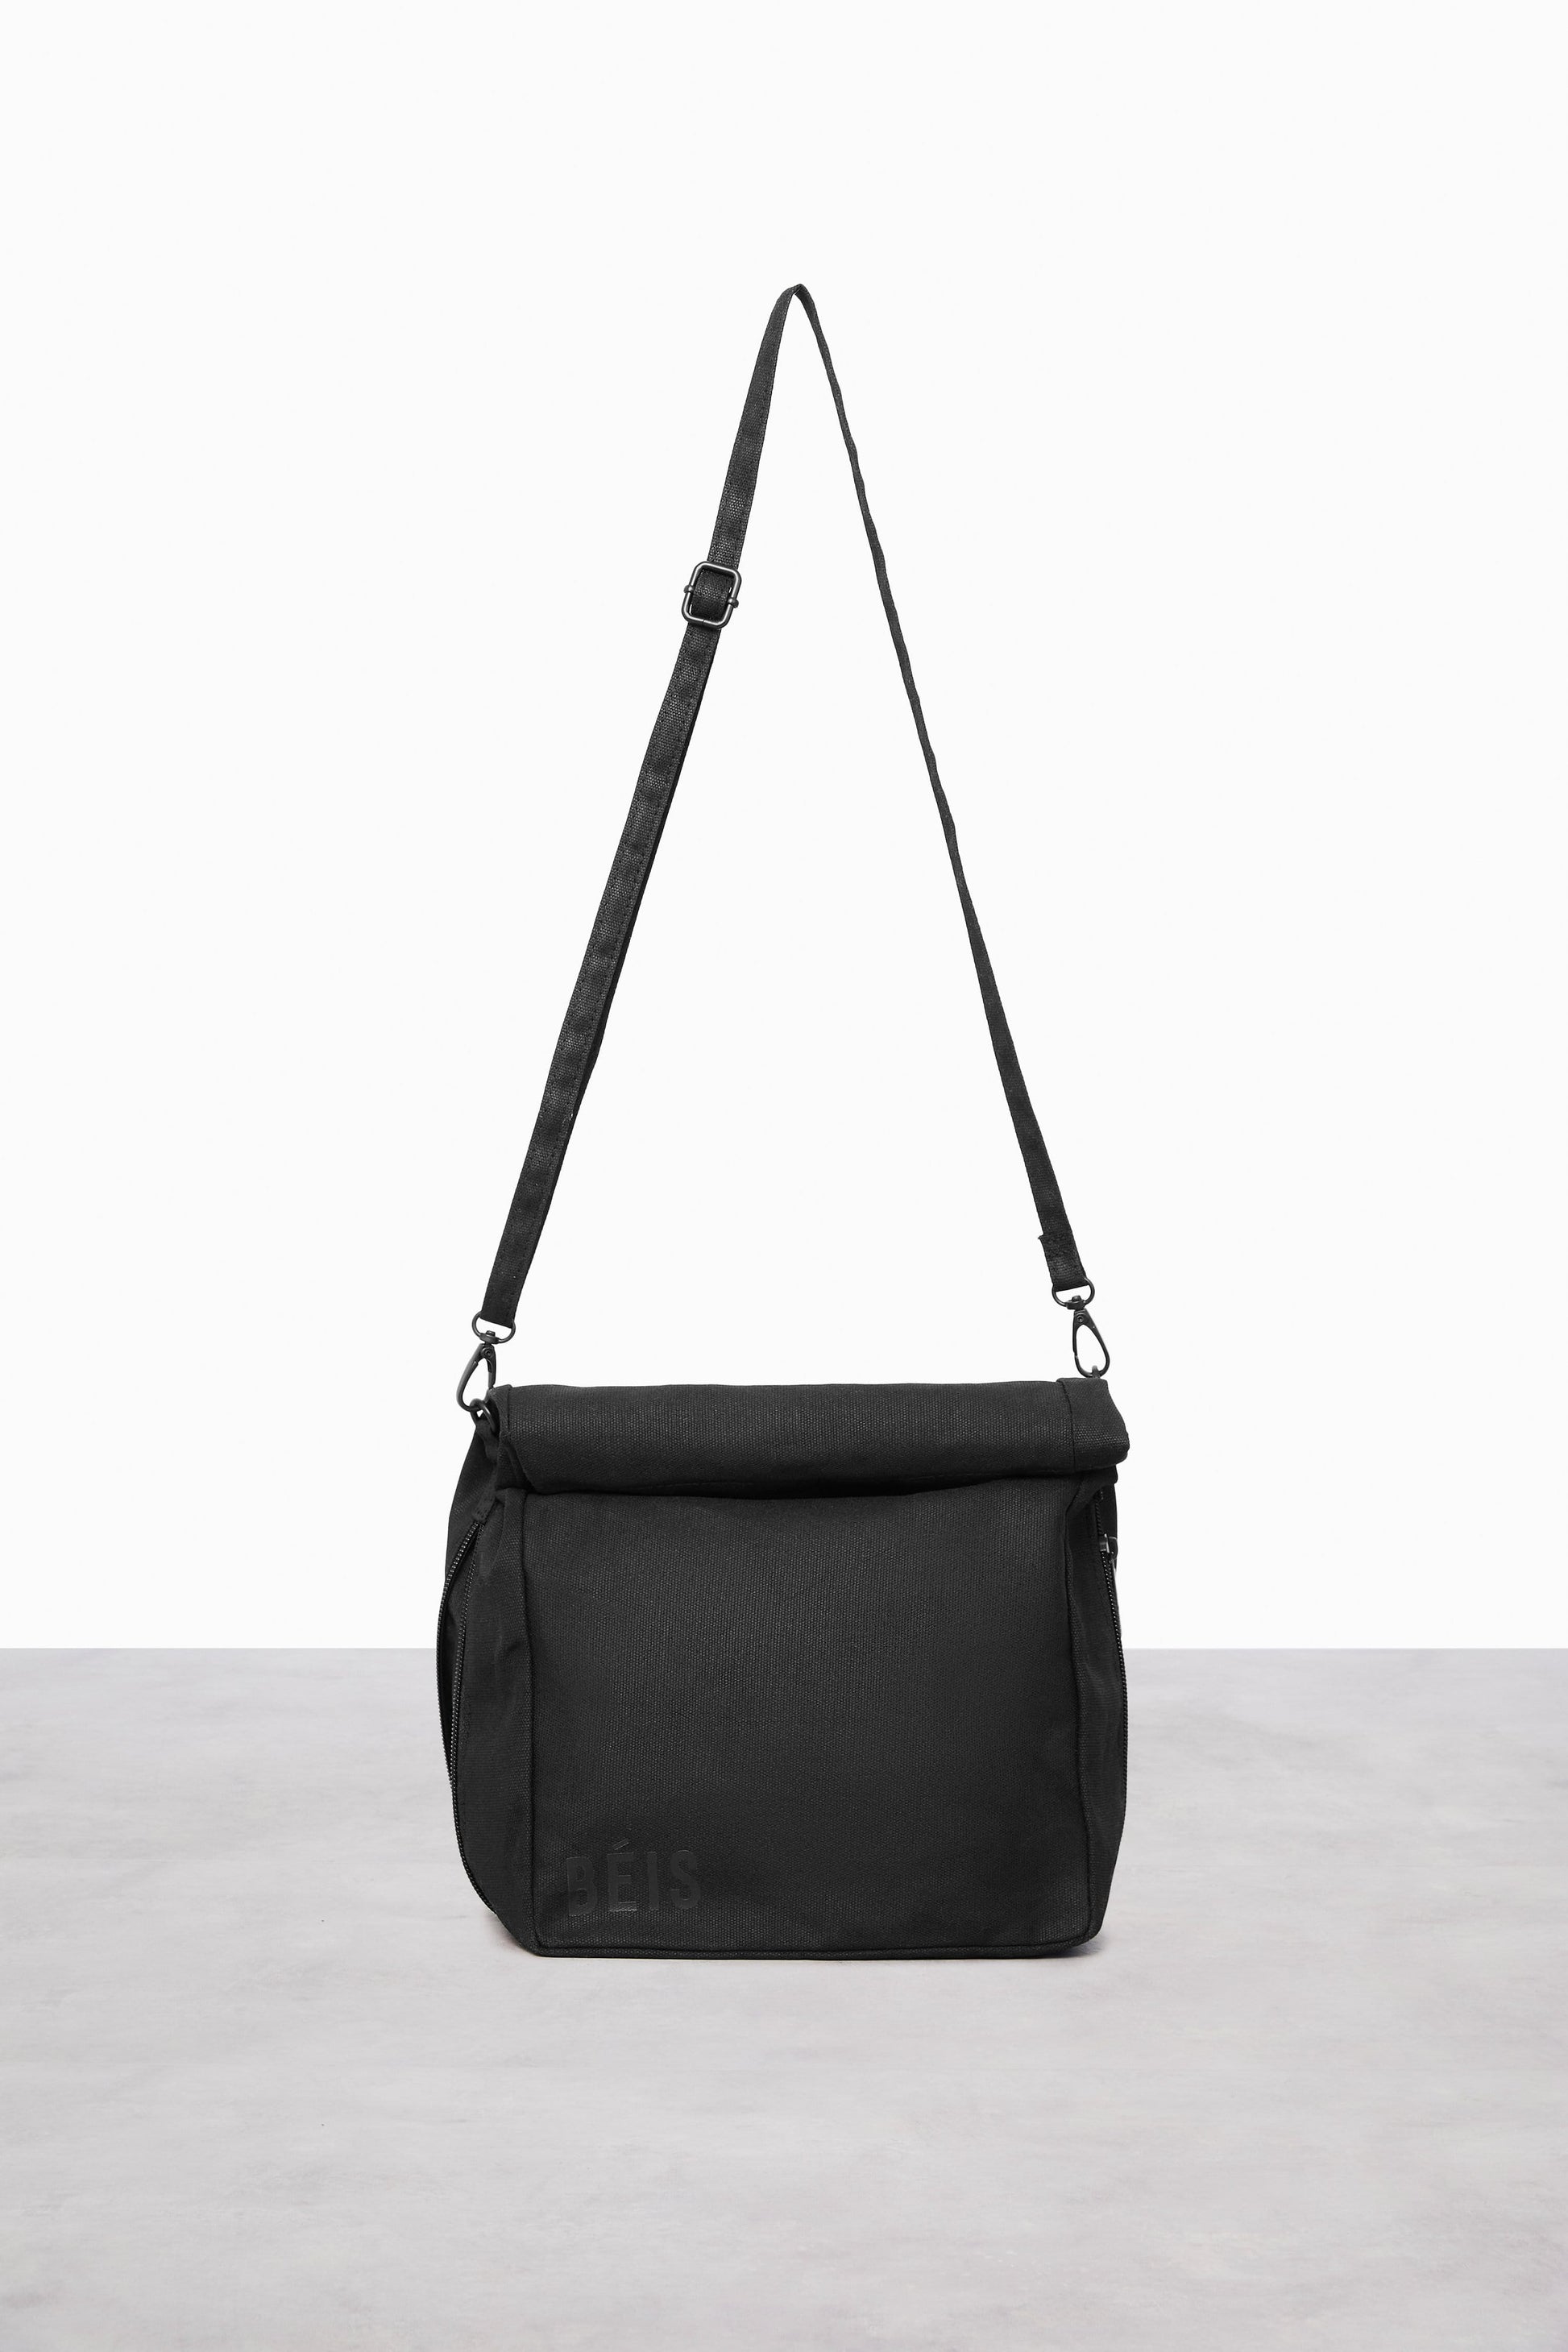 BÉIS 'The Lunch Bag' in Black